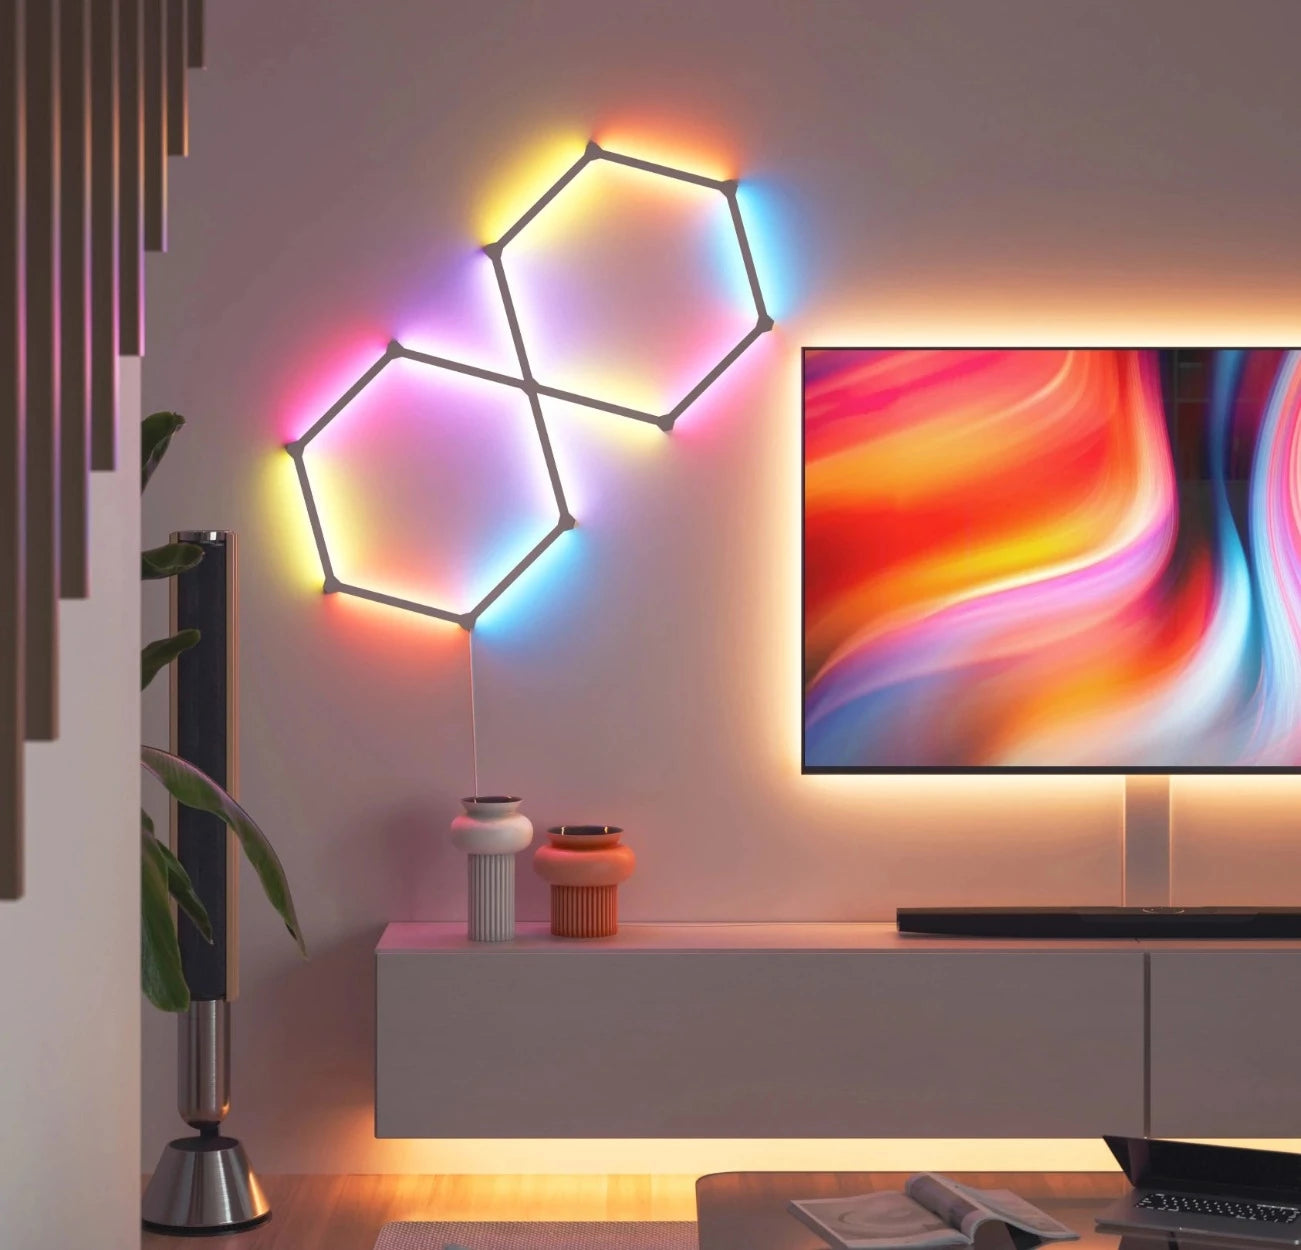 NANOLEAF LINES 60 DEGREES (STARTER KIT) FOR GAMING ROOM AND HOME AUTOMATION